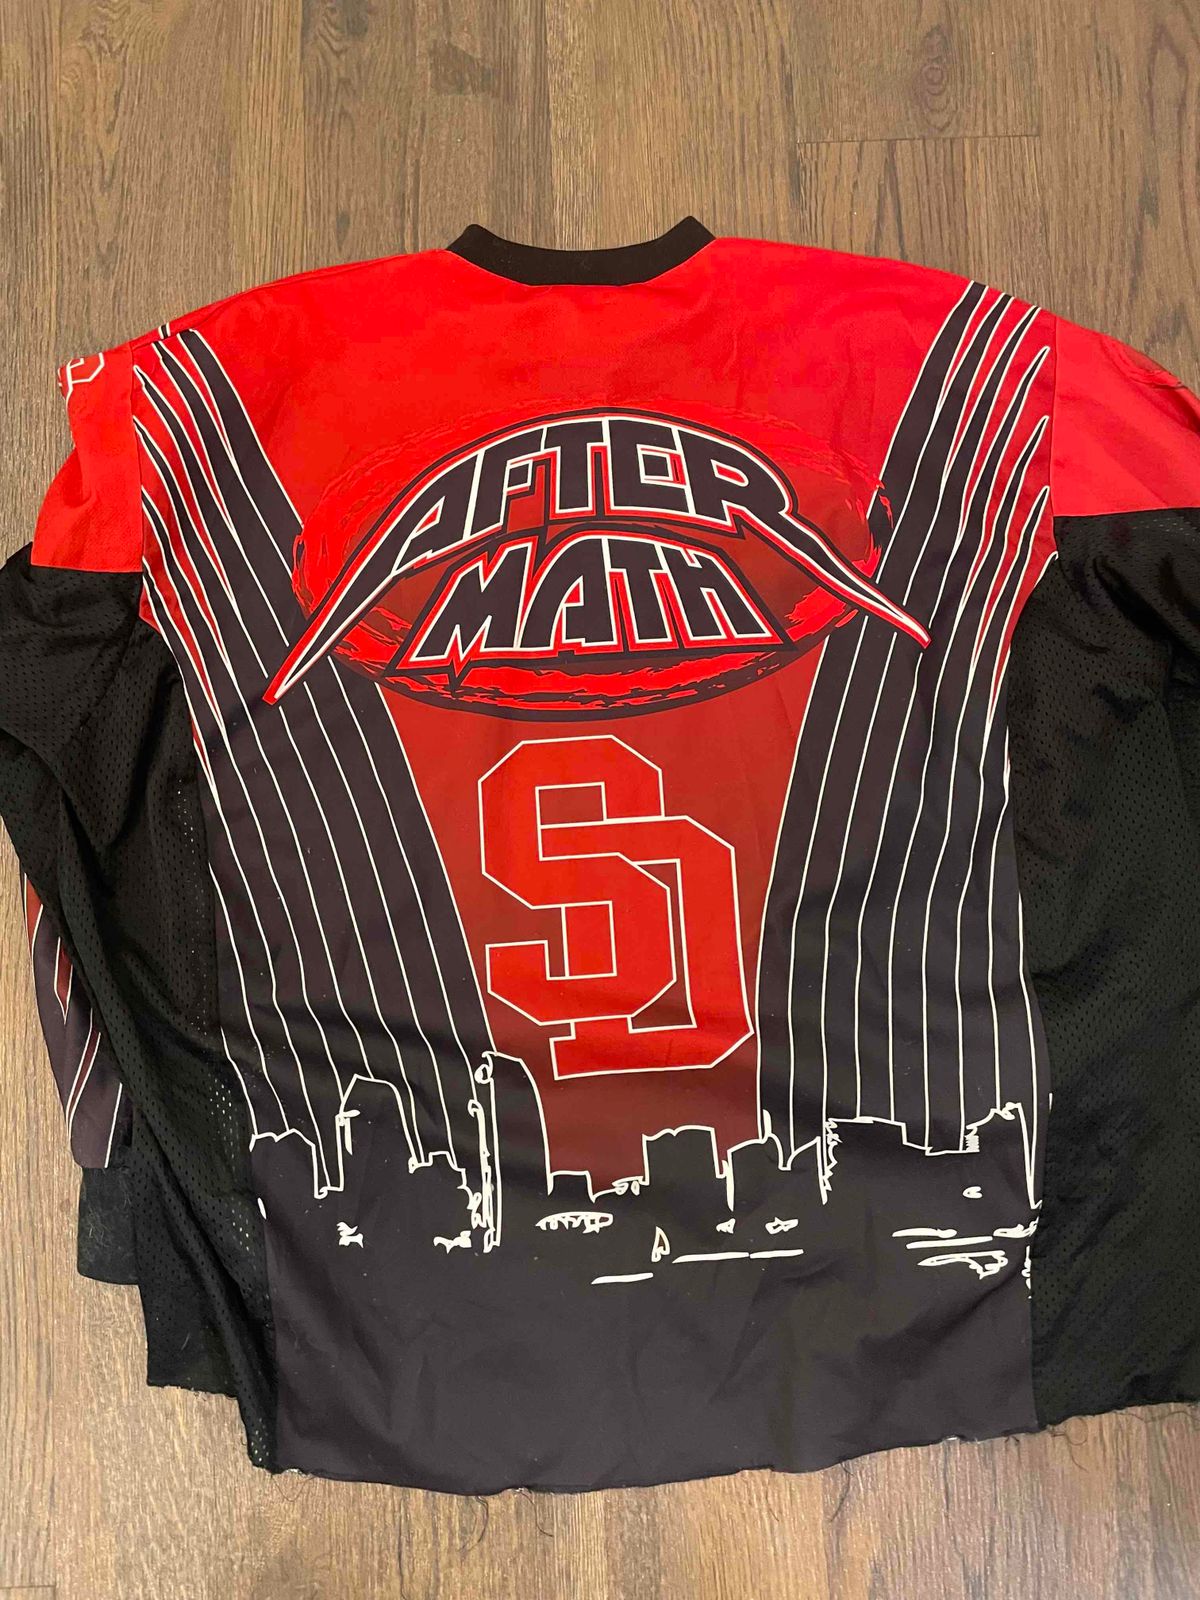 2007 SD Aftermath Jersey